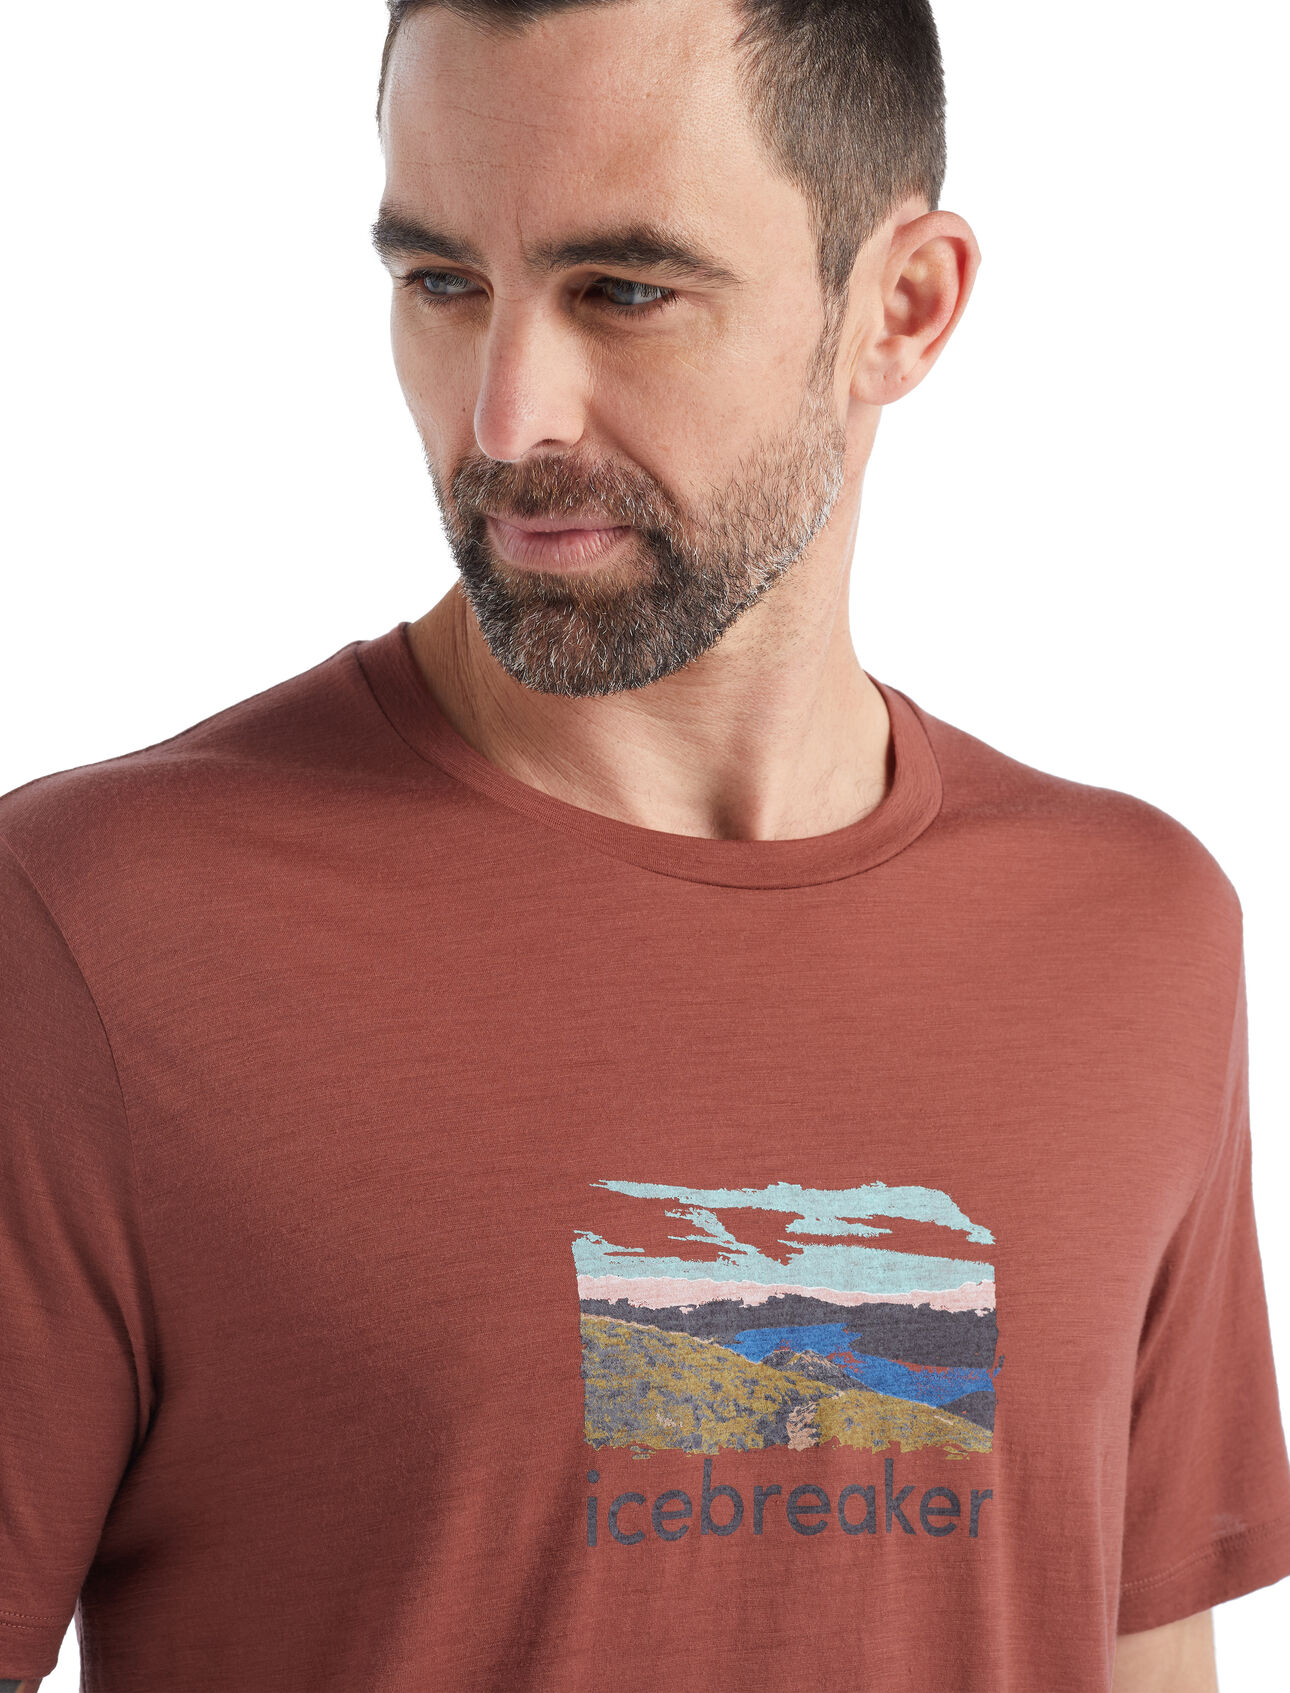 Mens Merino Tech Lite II Short Sleeve T-Shirt Trailhead Our versatile Tech Tee that provides comfort, breathability and odor-resistance for any adventure you can think of, the Tech Lite II Short Sleeve Tee Trailhead features 100% merino for all-natural performance. The original artwork features a retro-inspired print of a trail in Queenstown, New Zealand.